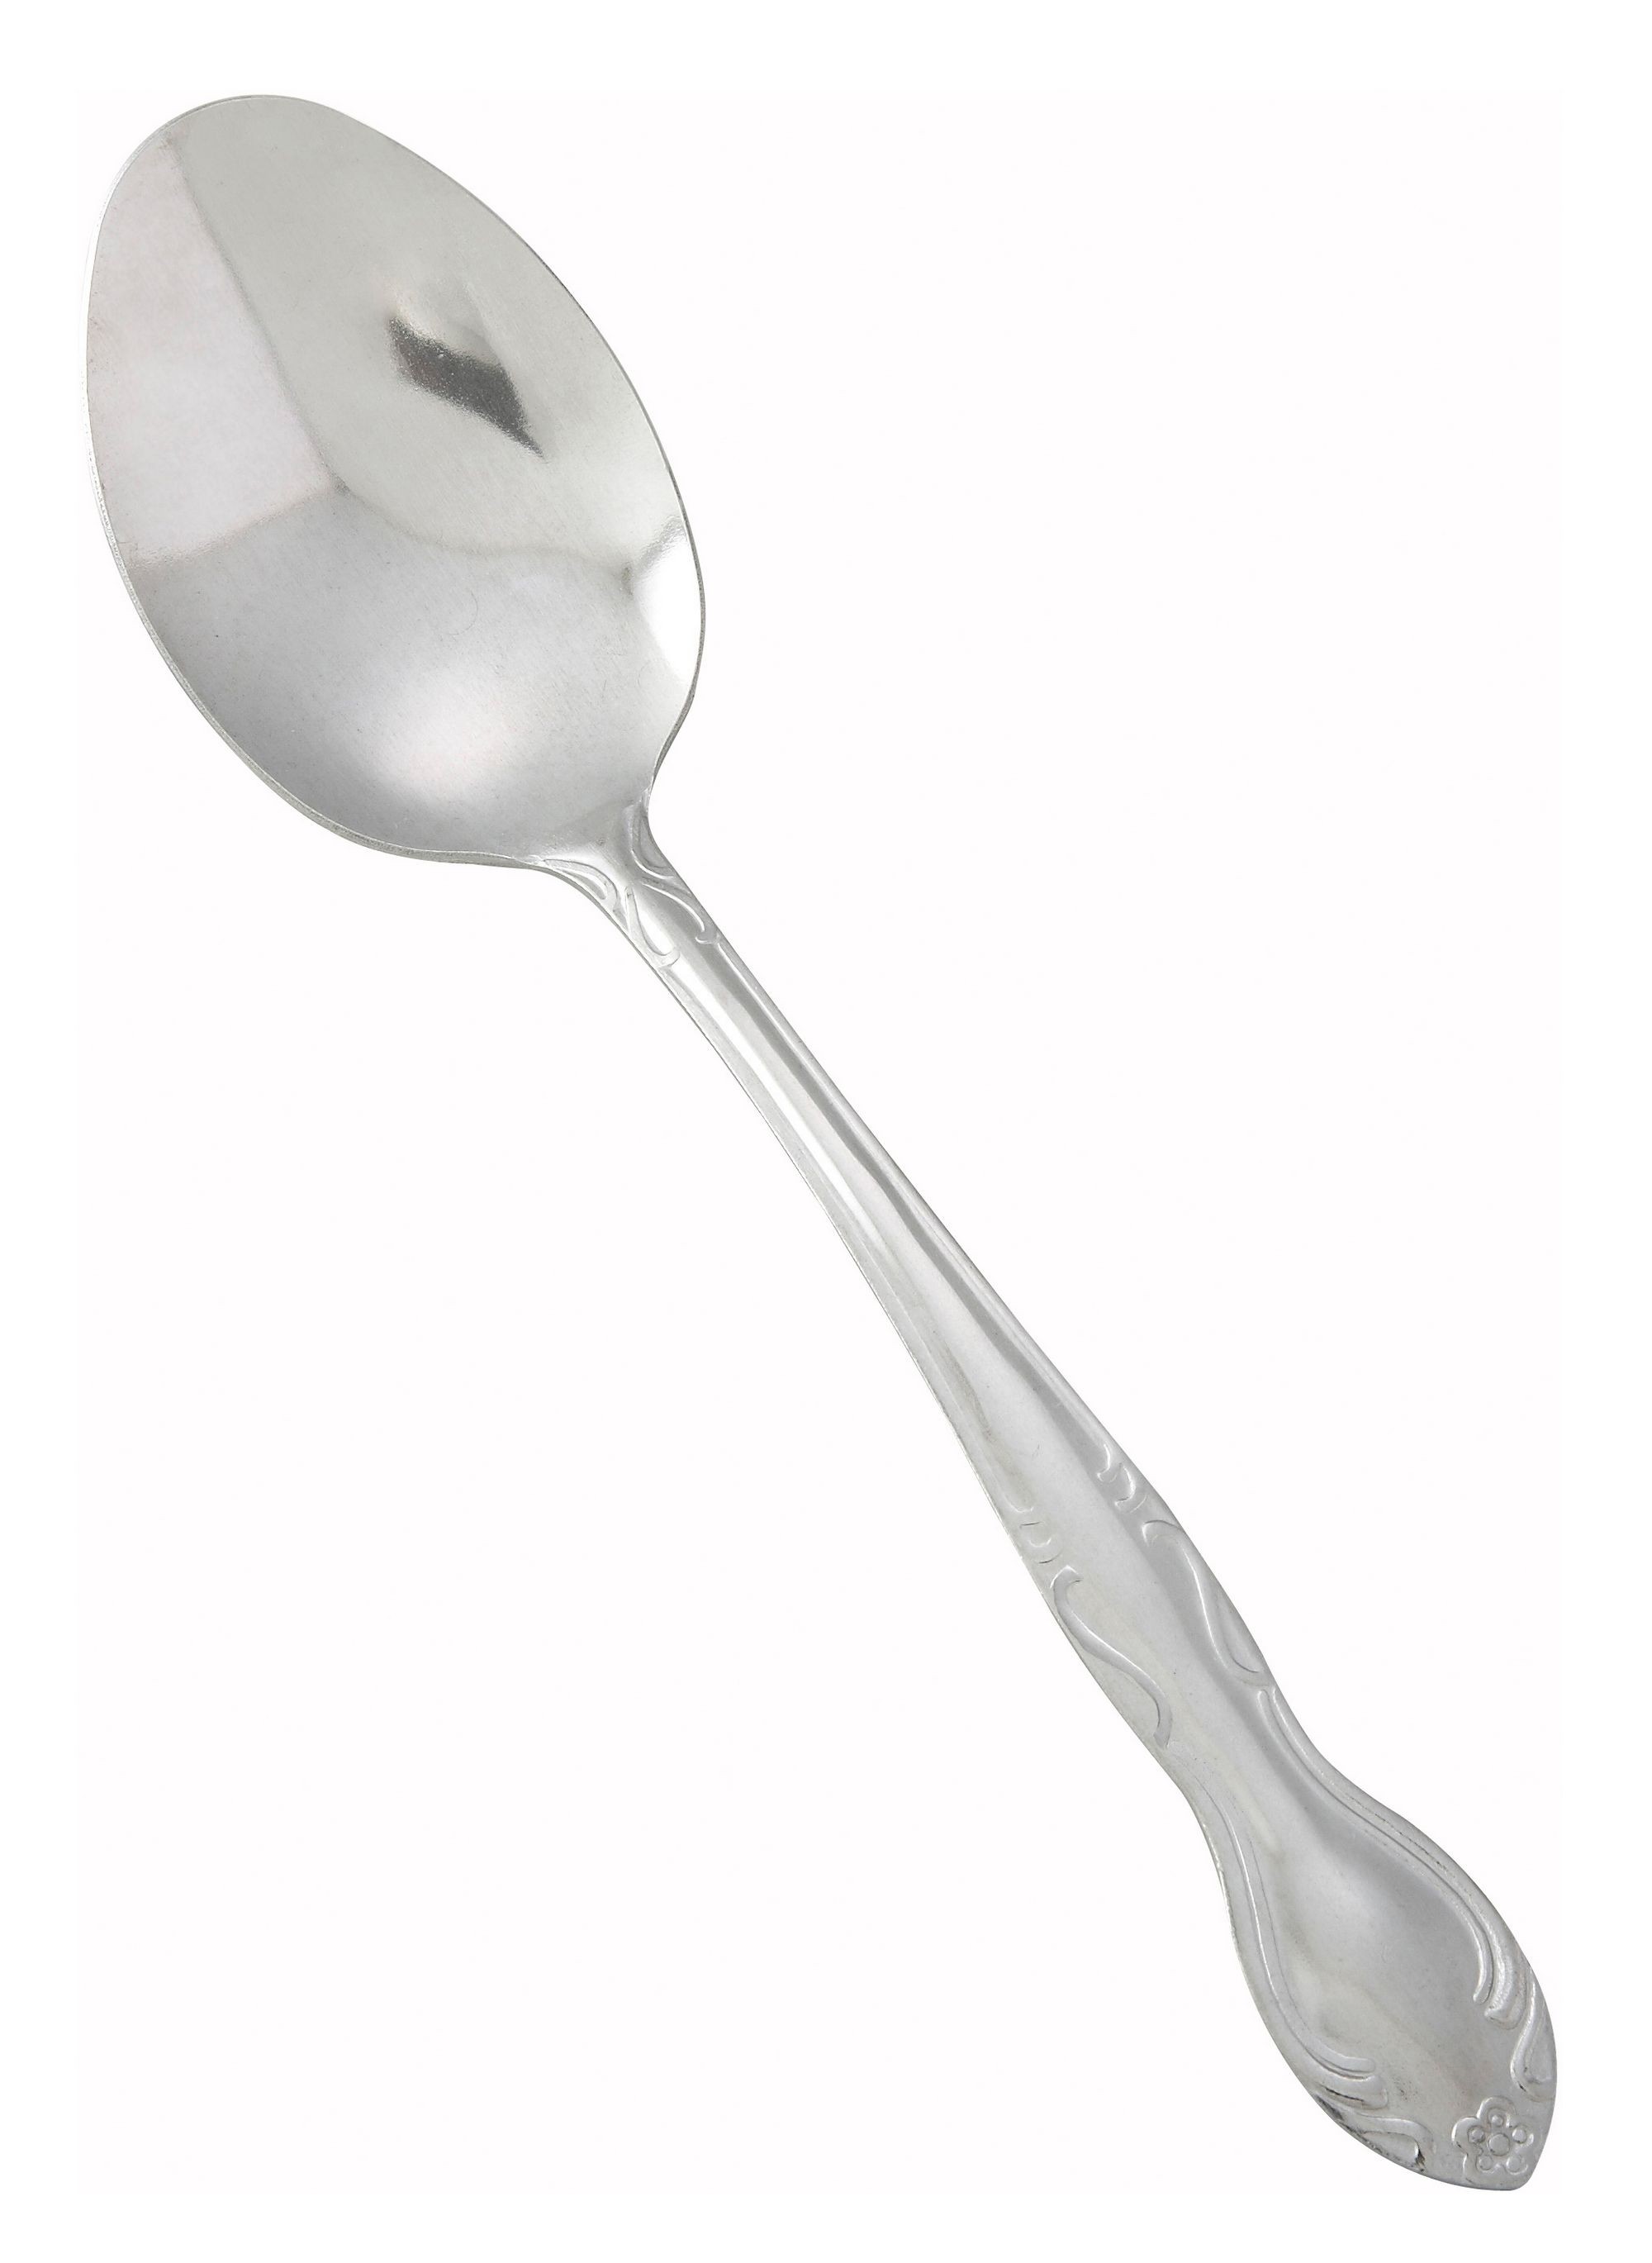 Winco 0004-10 Elegance Heavy Weight Vibro Finish Stainless Steel Table Spoon (12/Pack)